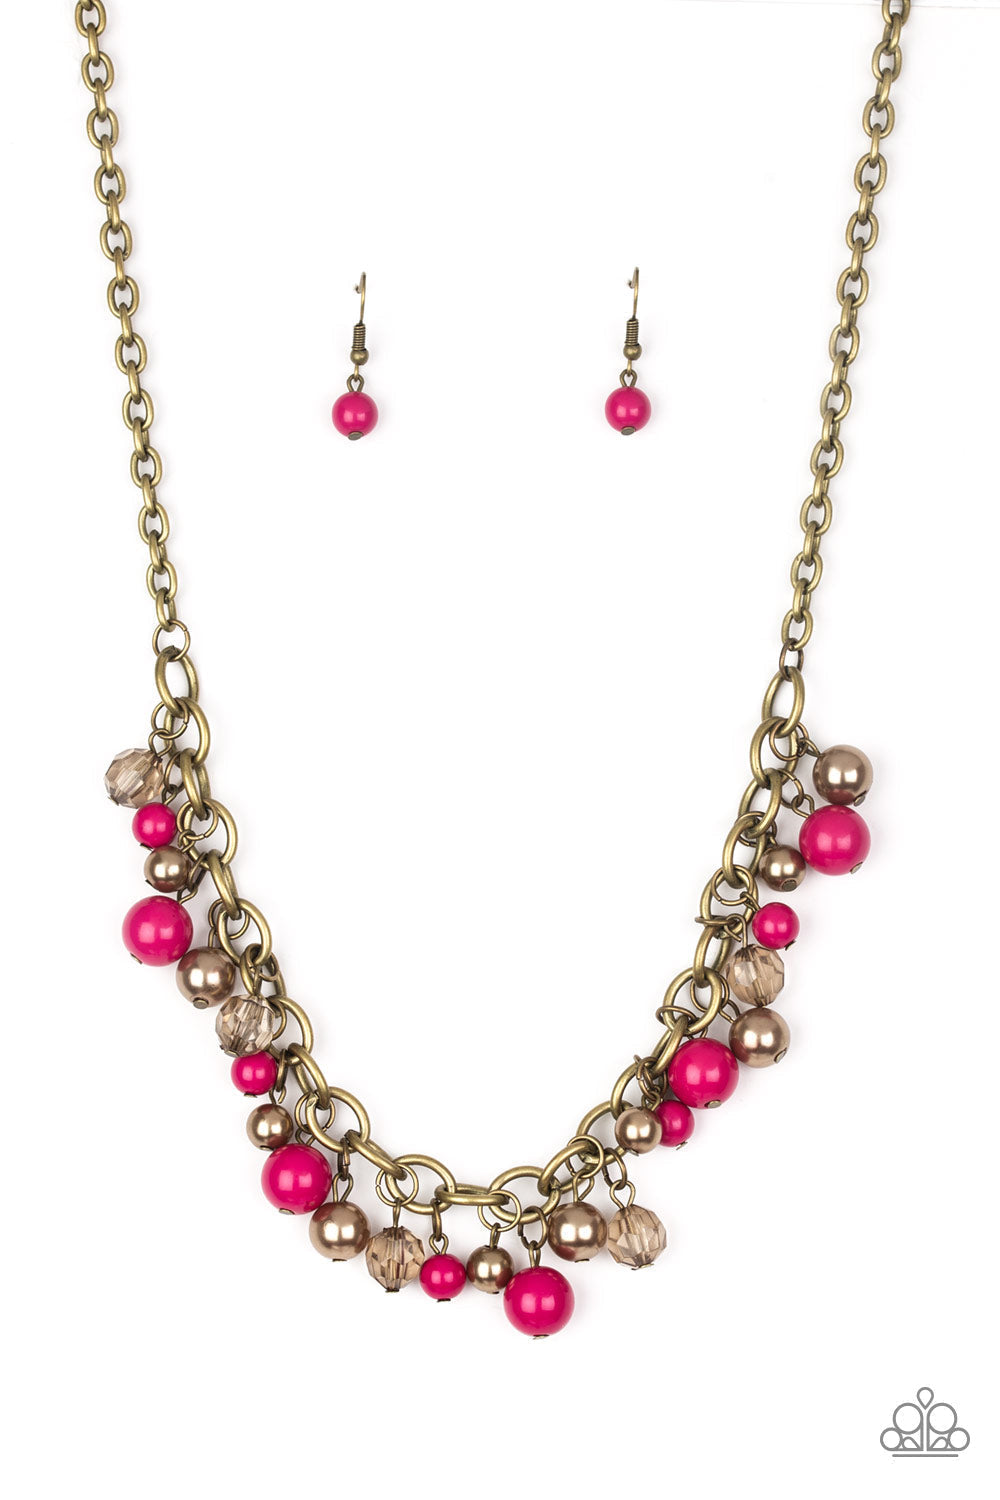 The GRIT Crowd - Pink and Brass Necklace - Paparazzi Accessories - Pearly brass, polished pink, and glittery crystal-like beads swing from a bold brass chain, creating a refined fringe below the collar. Features an adjustable clasp closure. Bejeweled Accessories By Kristie